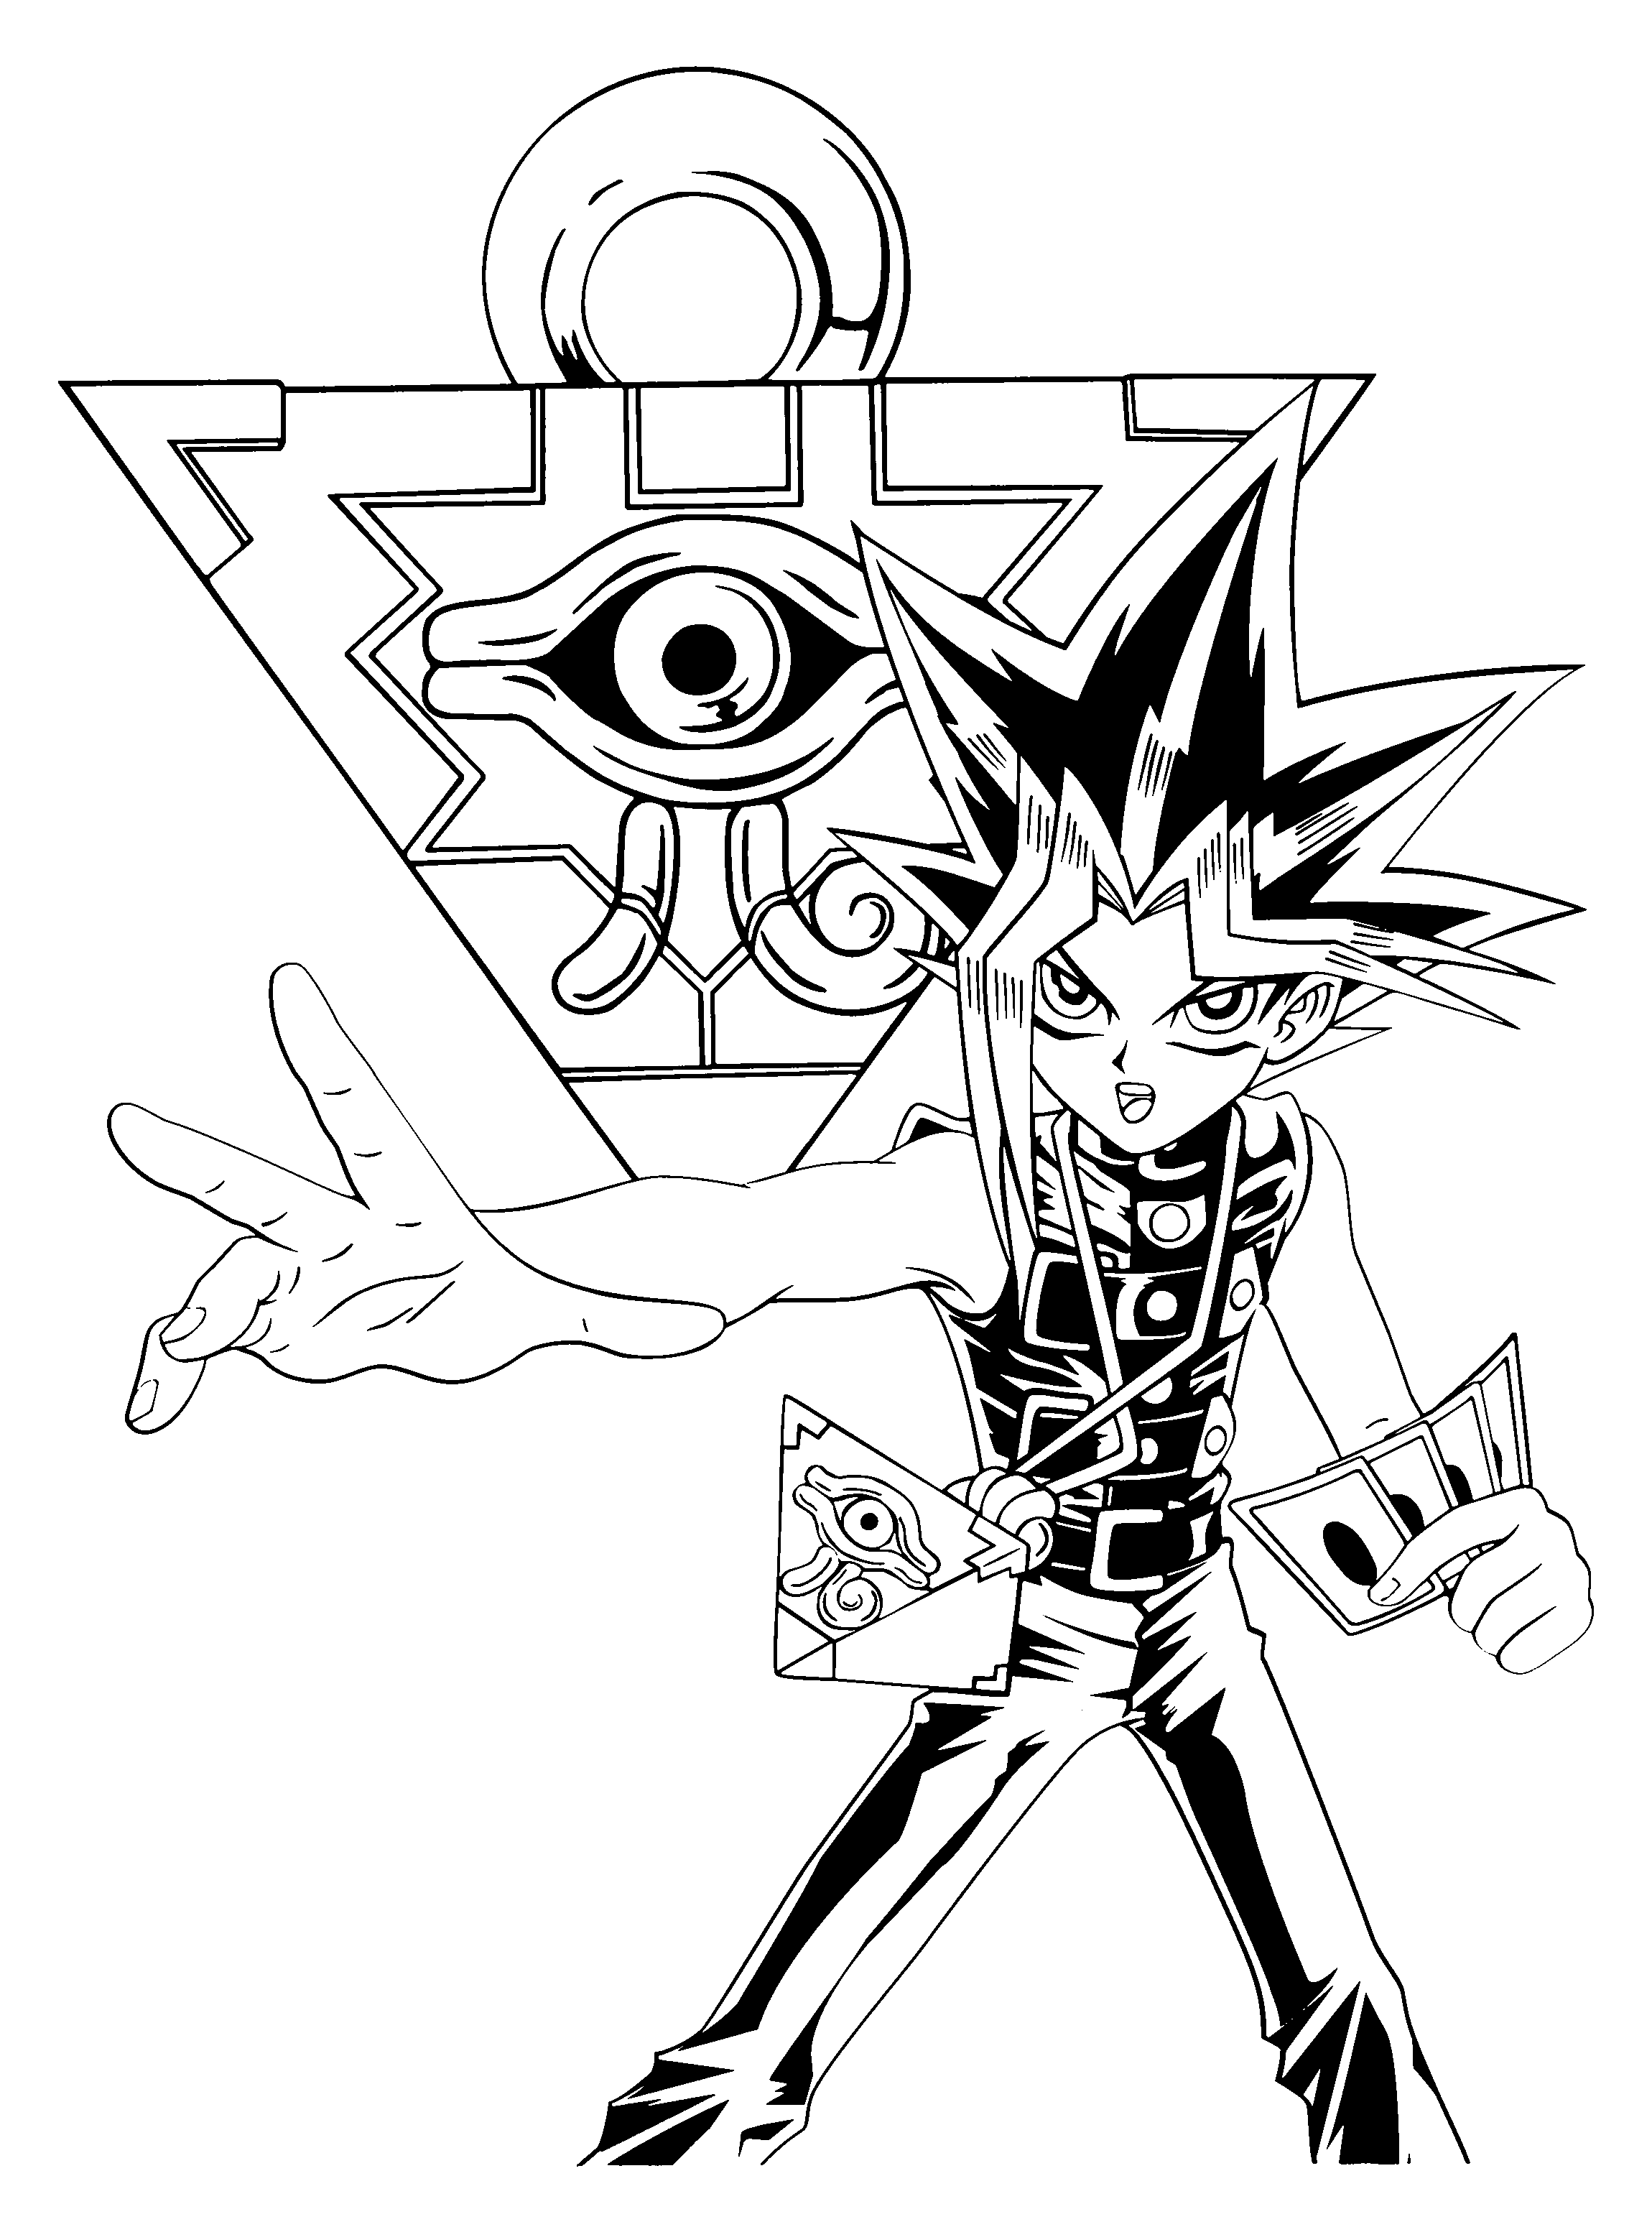 Yu-Gi-Oh! #33 (Cartoons) - Printable coloring pages